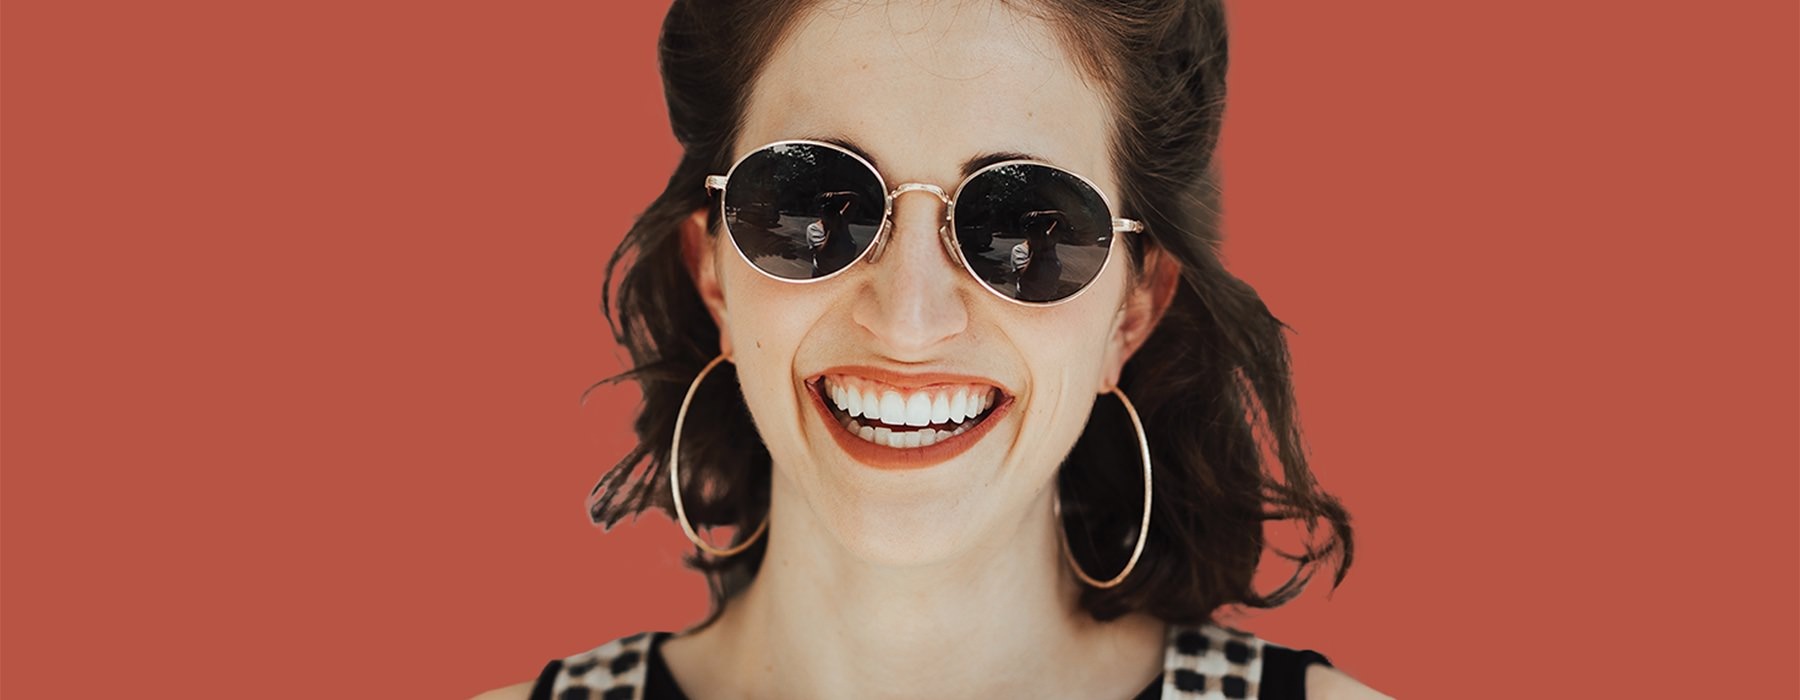 lifestyle image of a woman smiling